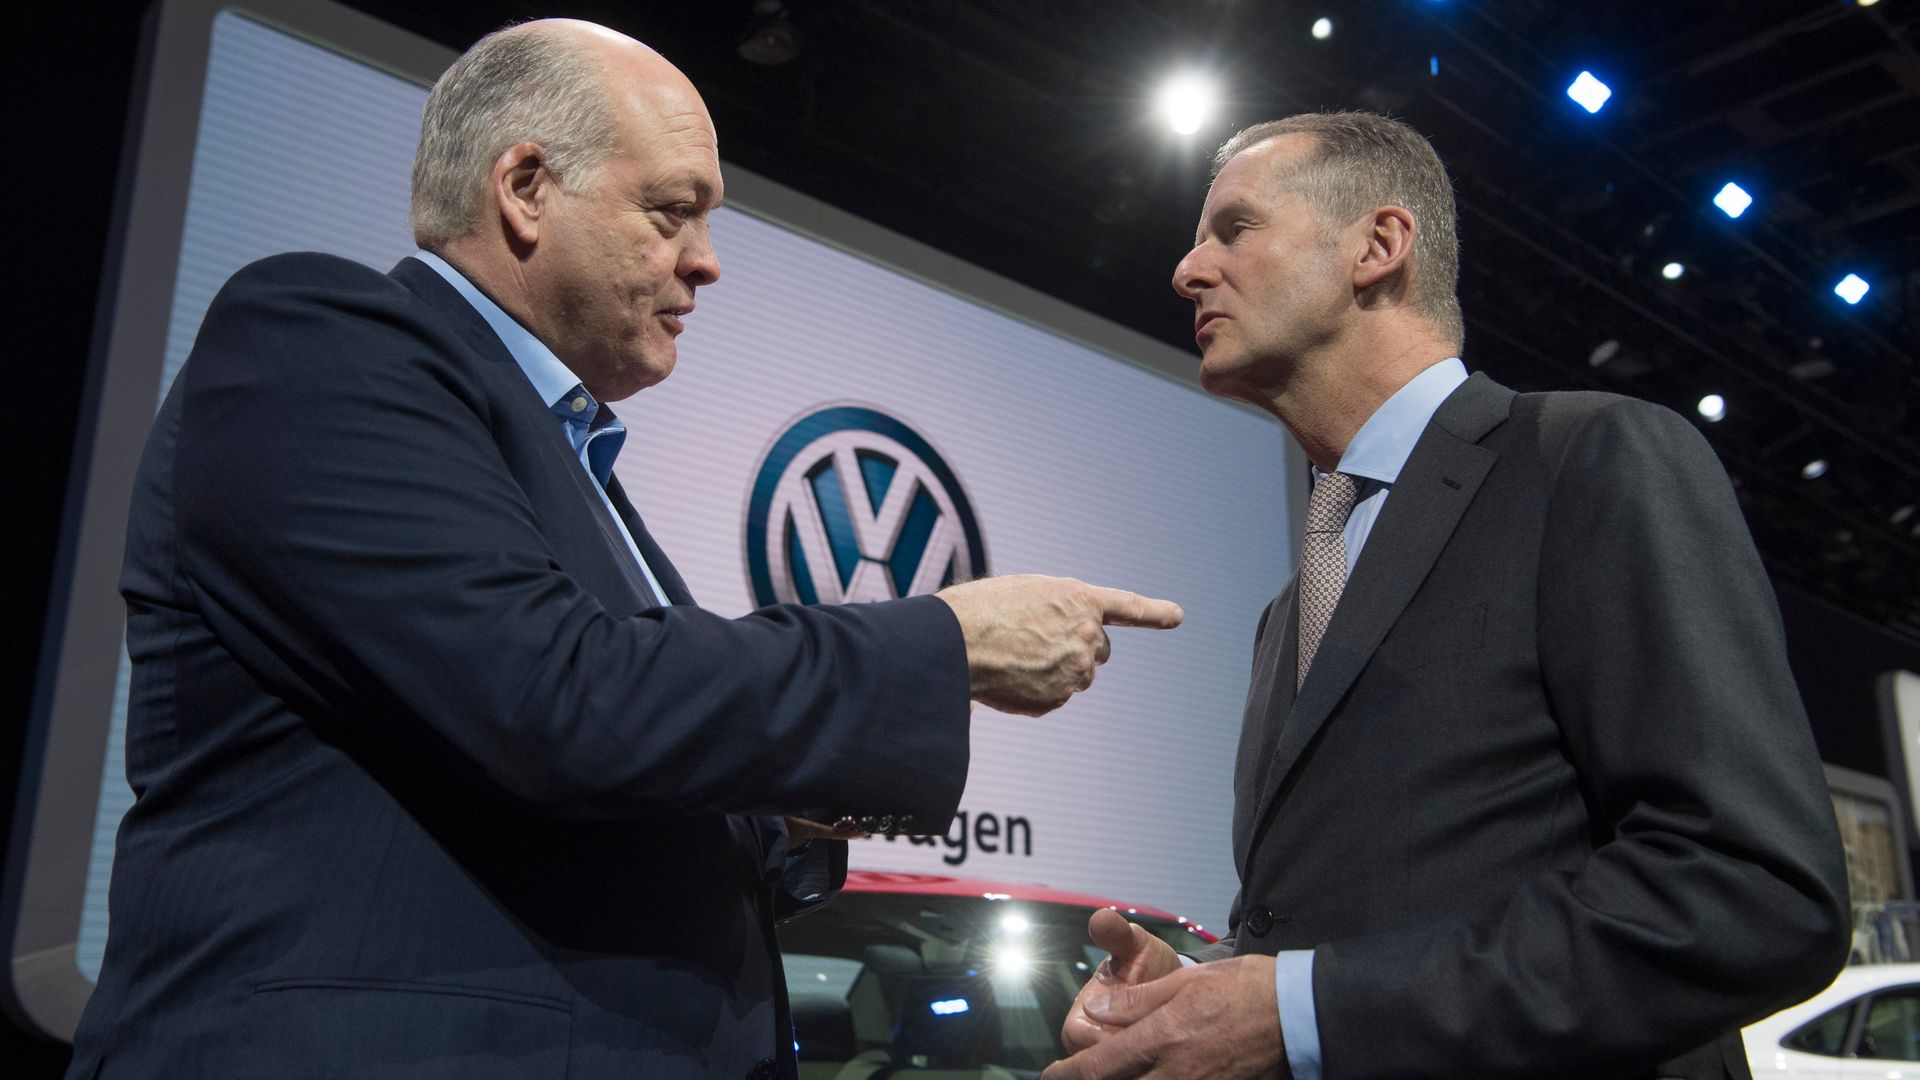 Jim Hackett (l), CEO of Ford, and Herbert Diess, CEO of VW, converse at the VW 